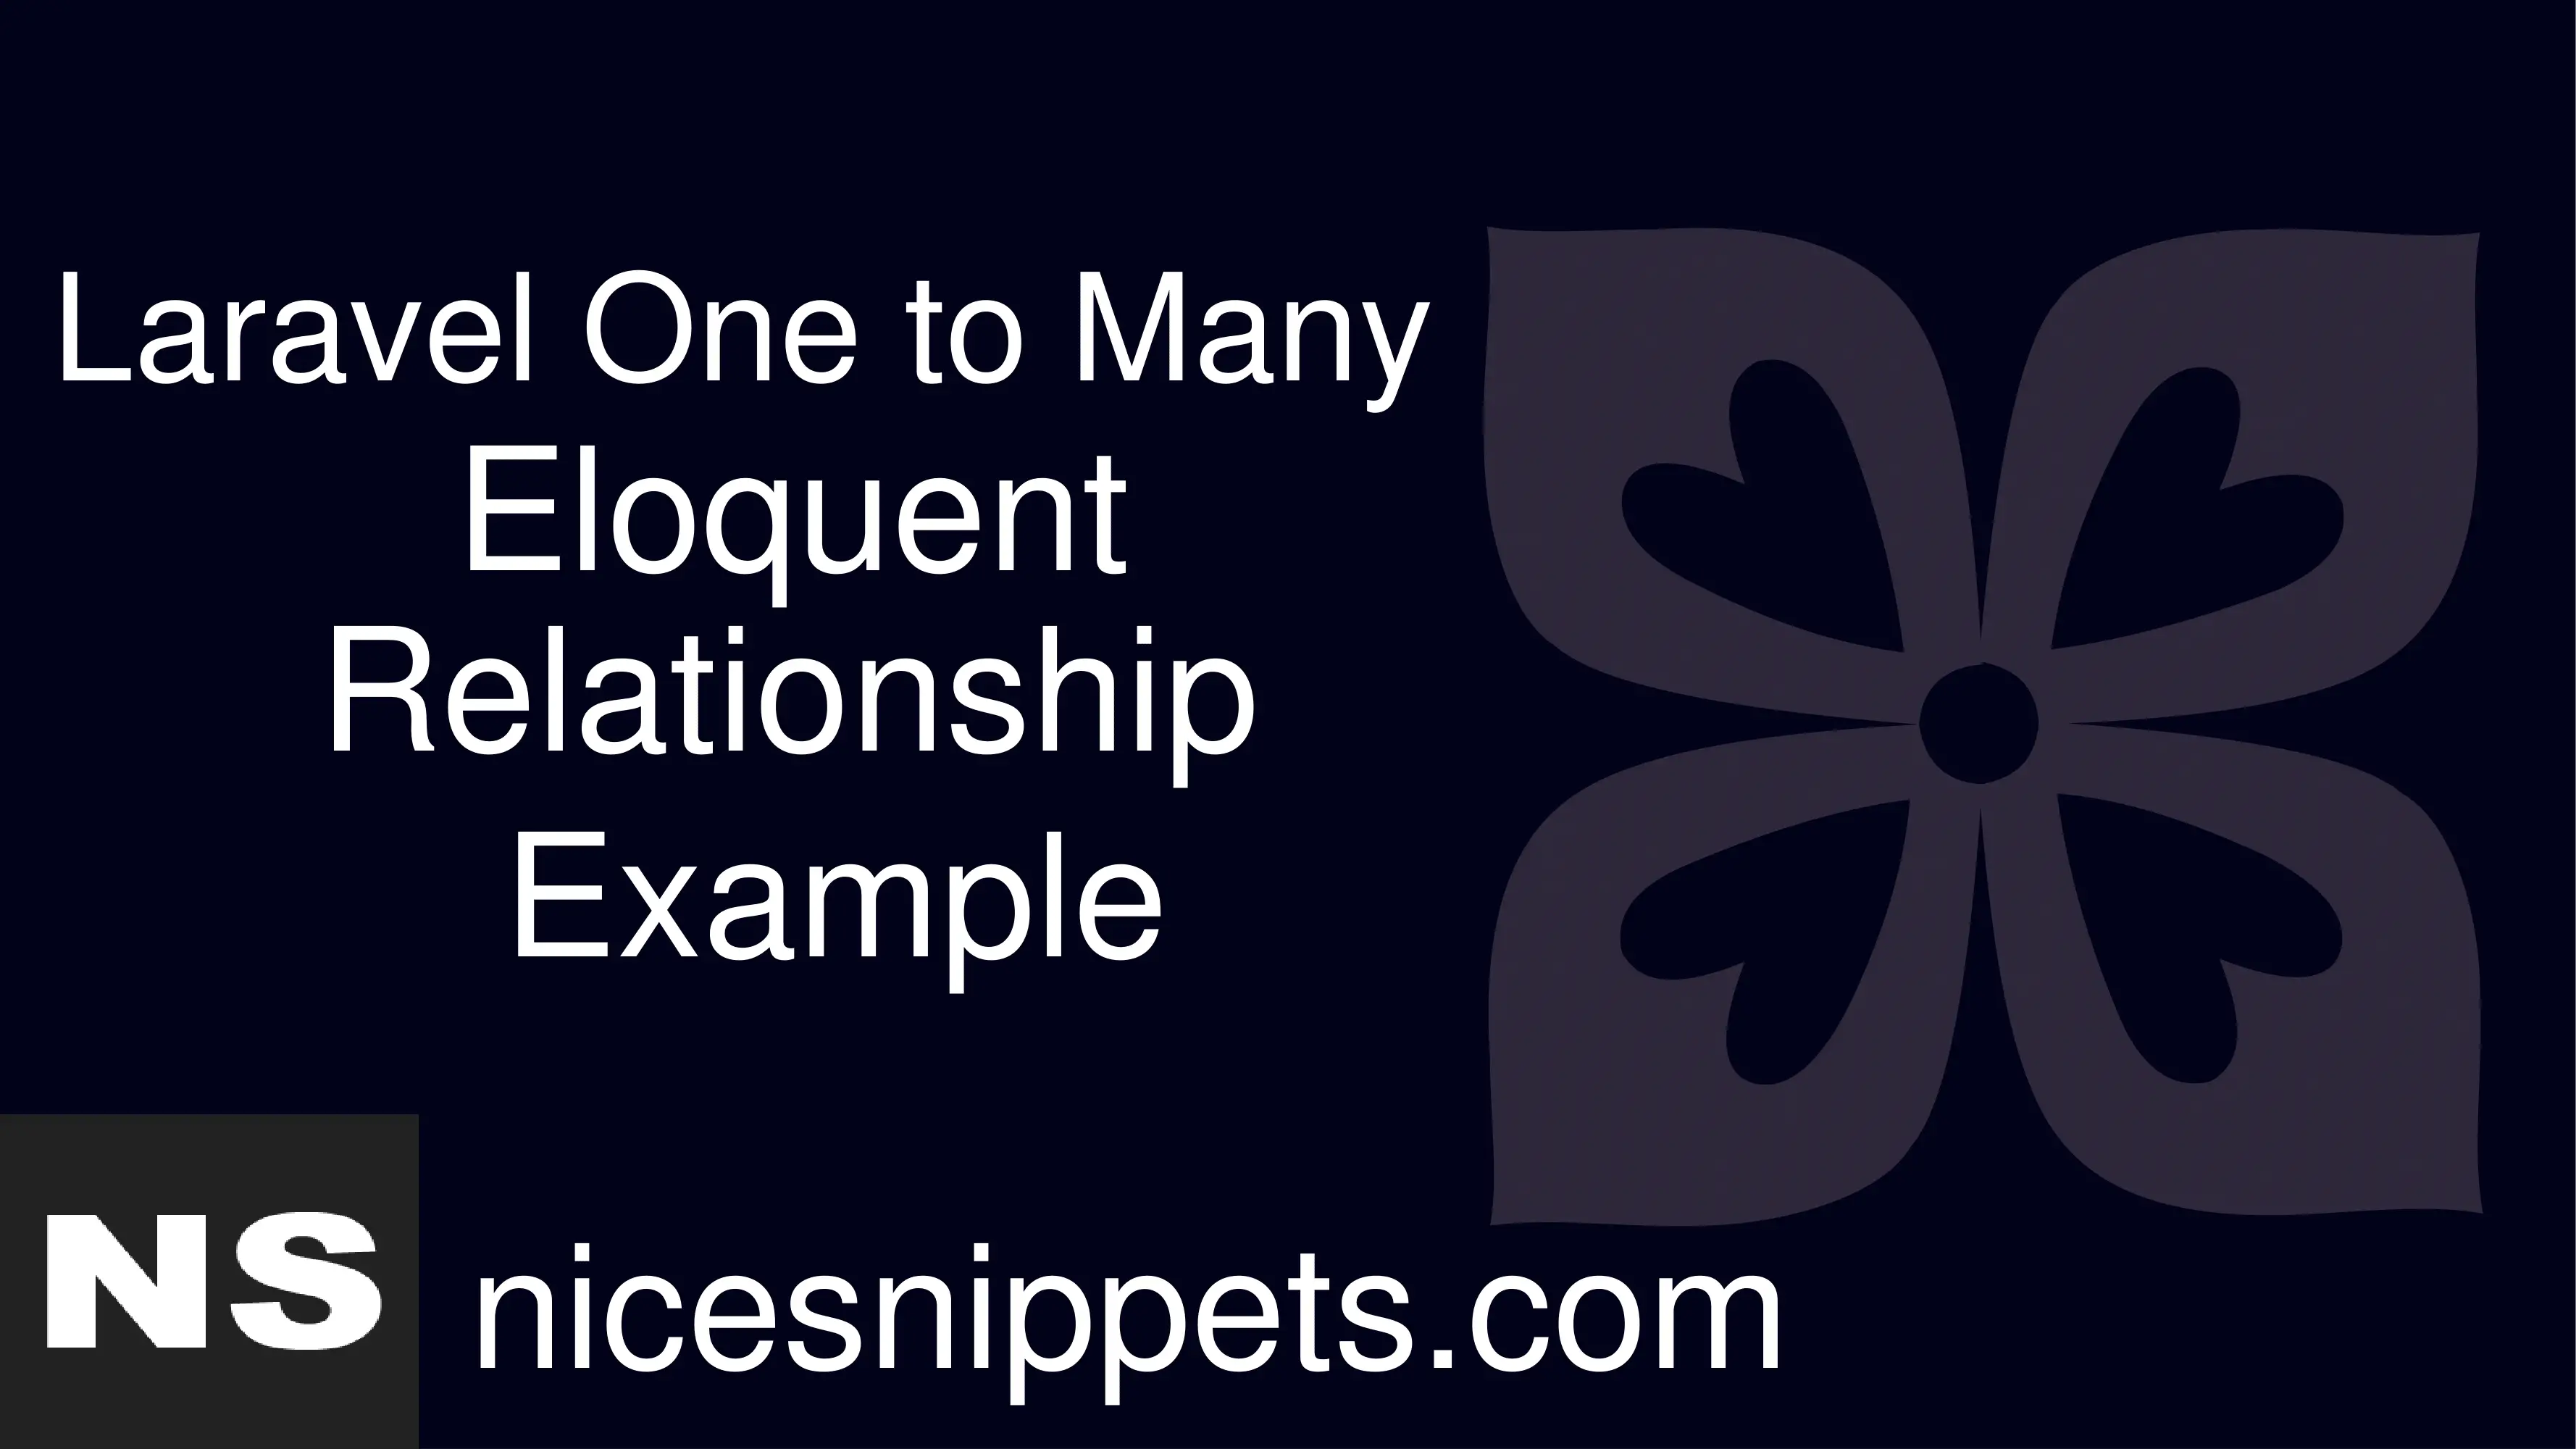 Laravel One To Many Eloquent Relationship Example